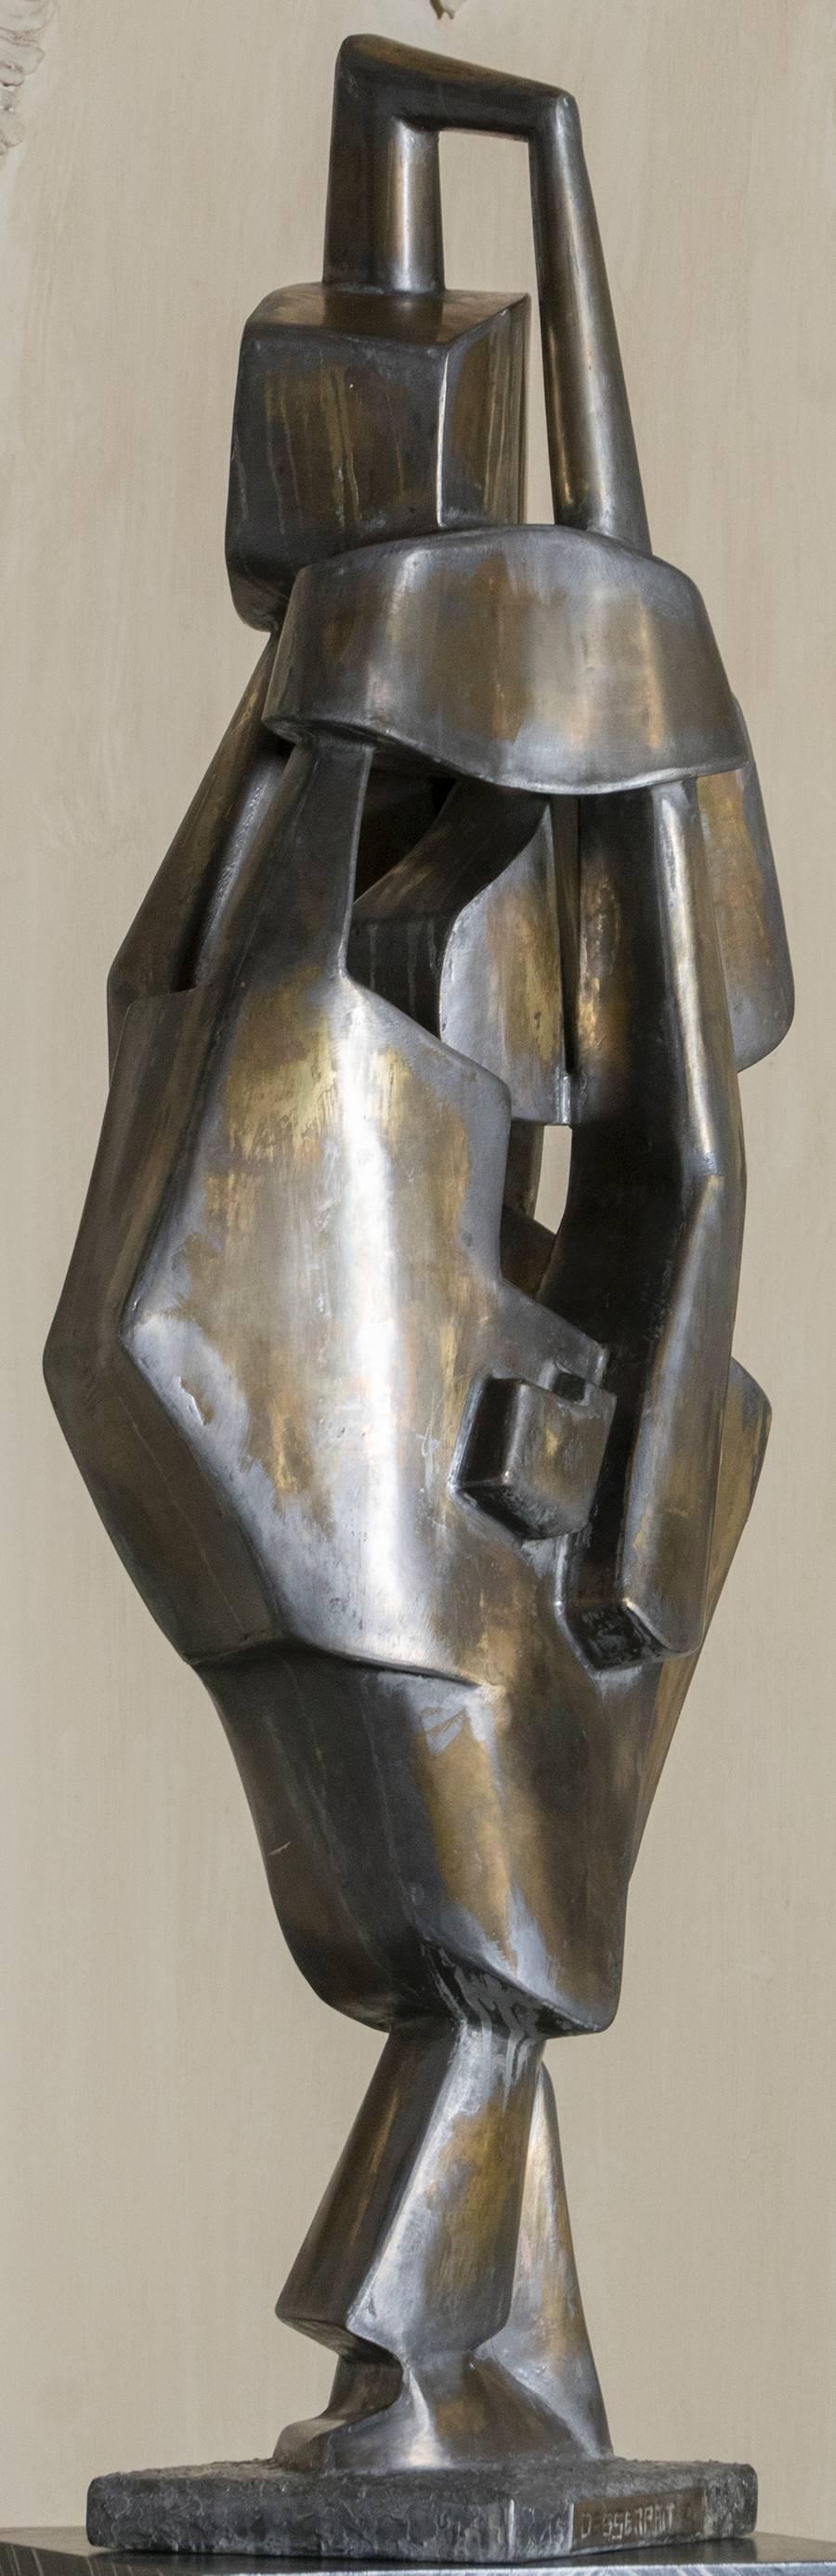 The sculpture is realized in aluminum with beautiful vintage patina, signed and dated.